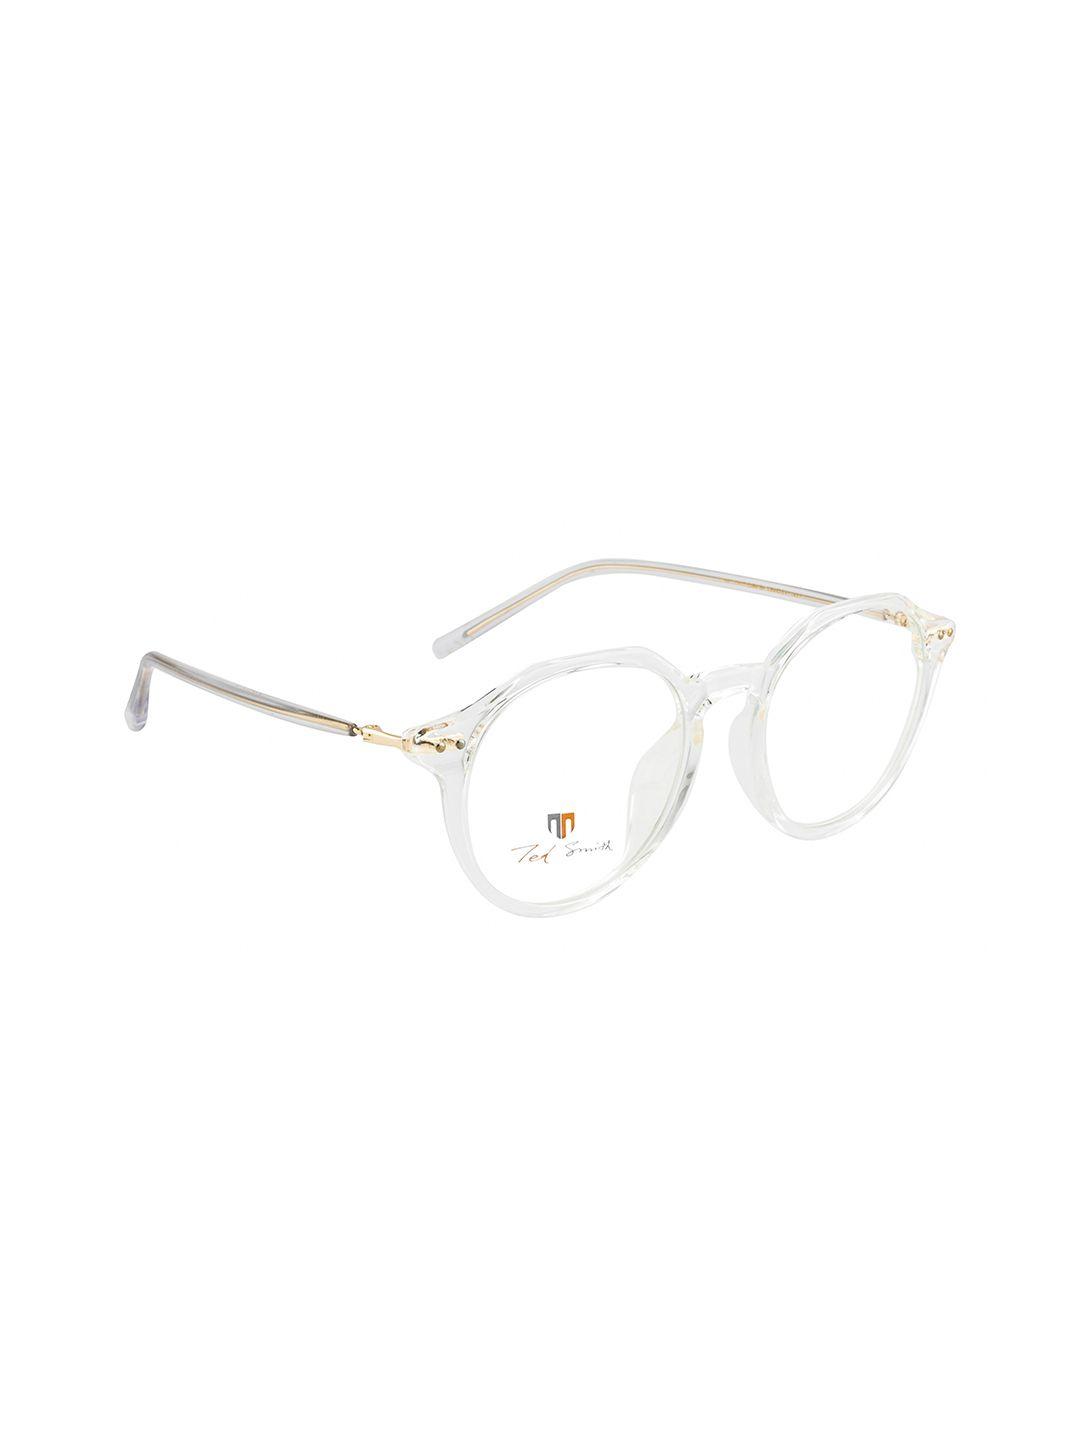 ted smith unisex transparent full rim round frames ts-11017_cry